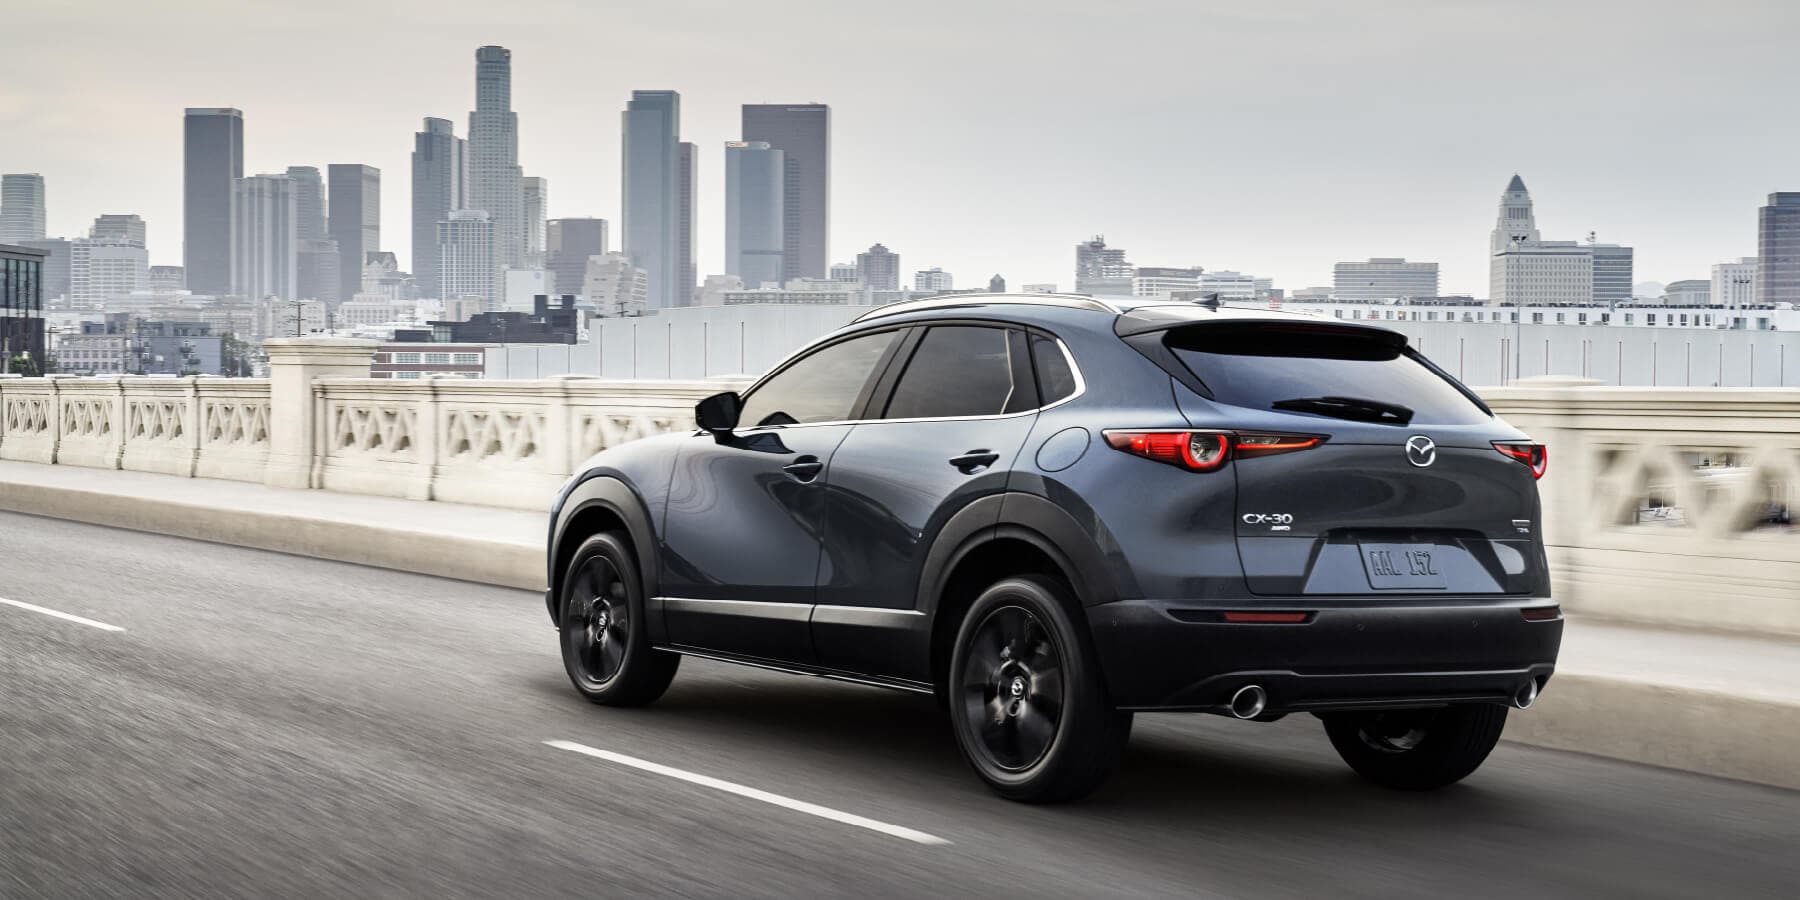 Find the ideal new MAZDA Vehicle for a Family of Five at Tumminia